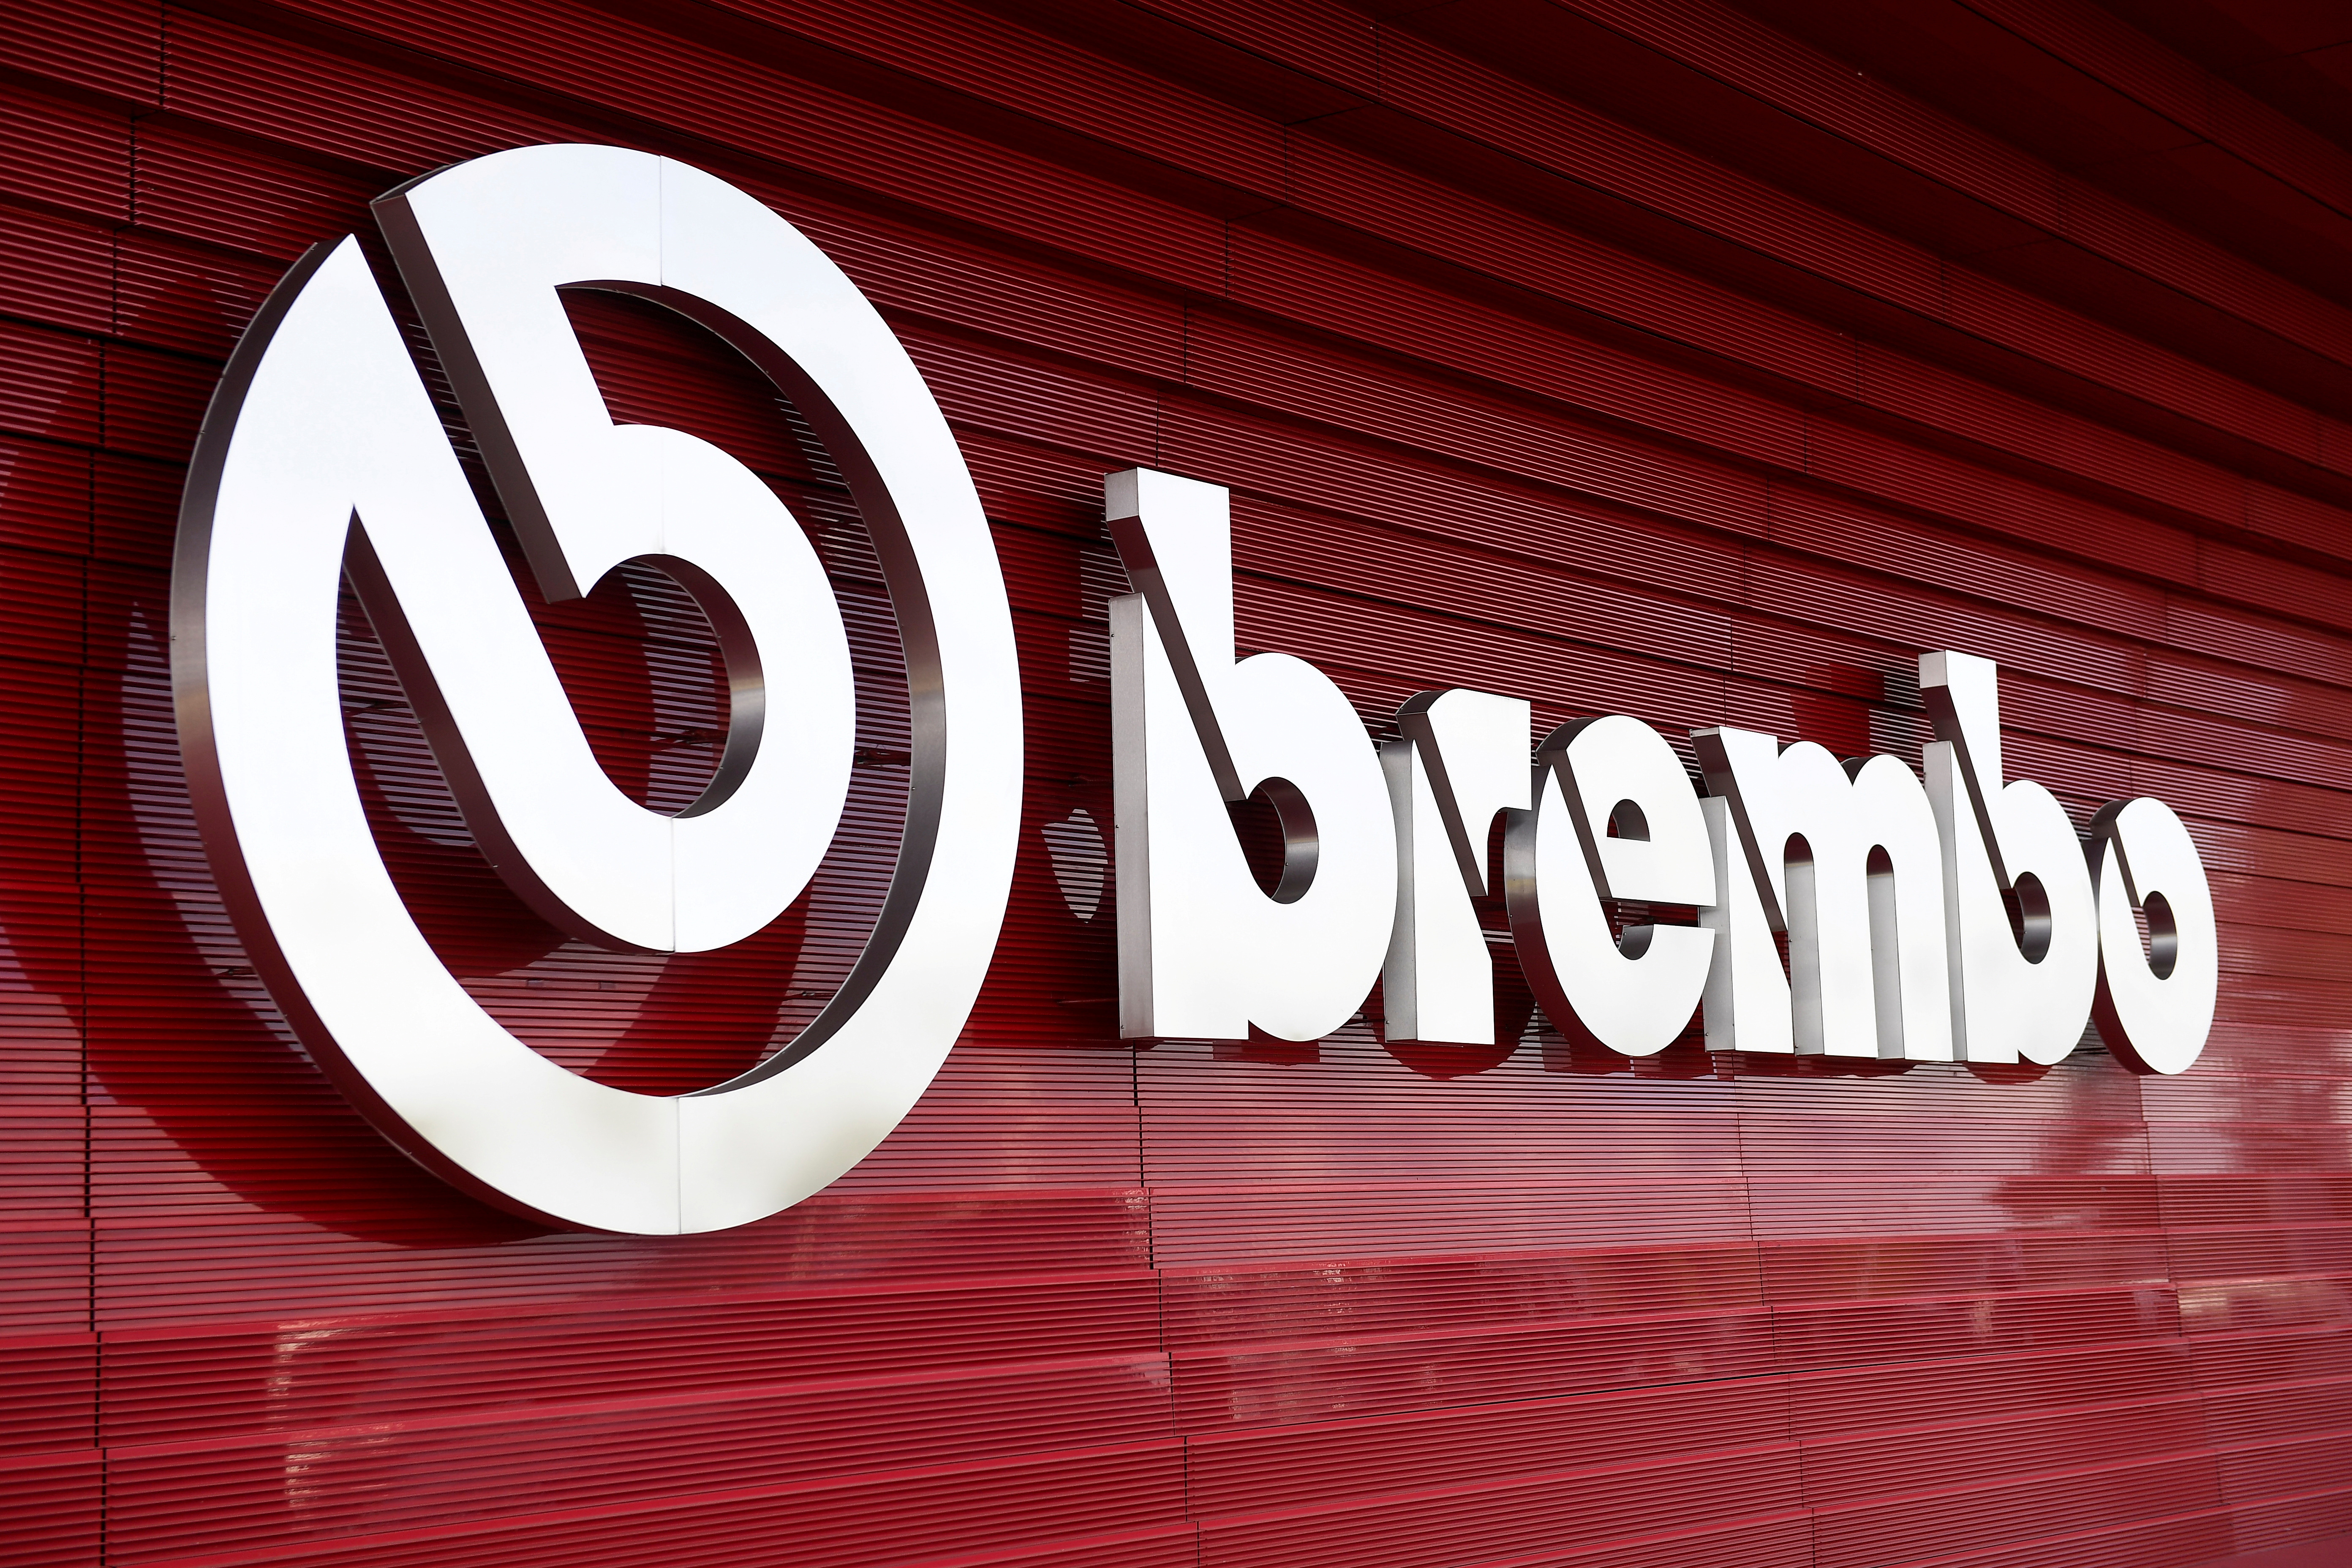 The logo of Brembo is seen at its headquarters in Bergamo, Italy October 7, 2019. REUTERS/Flavio Lo Scalzo